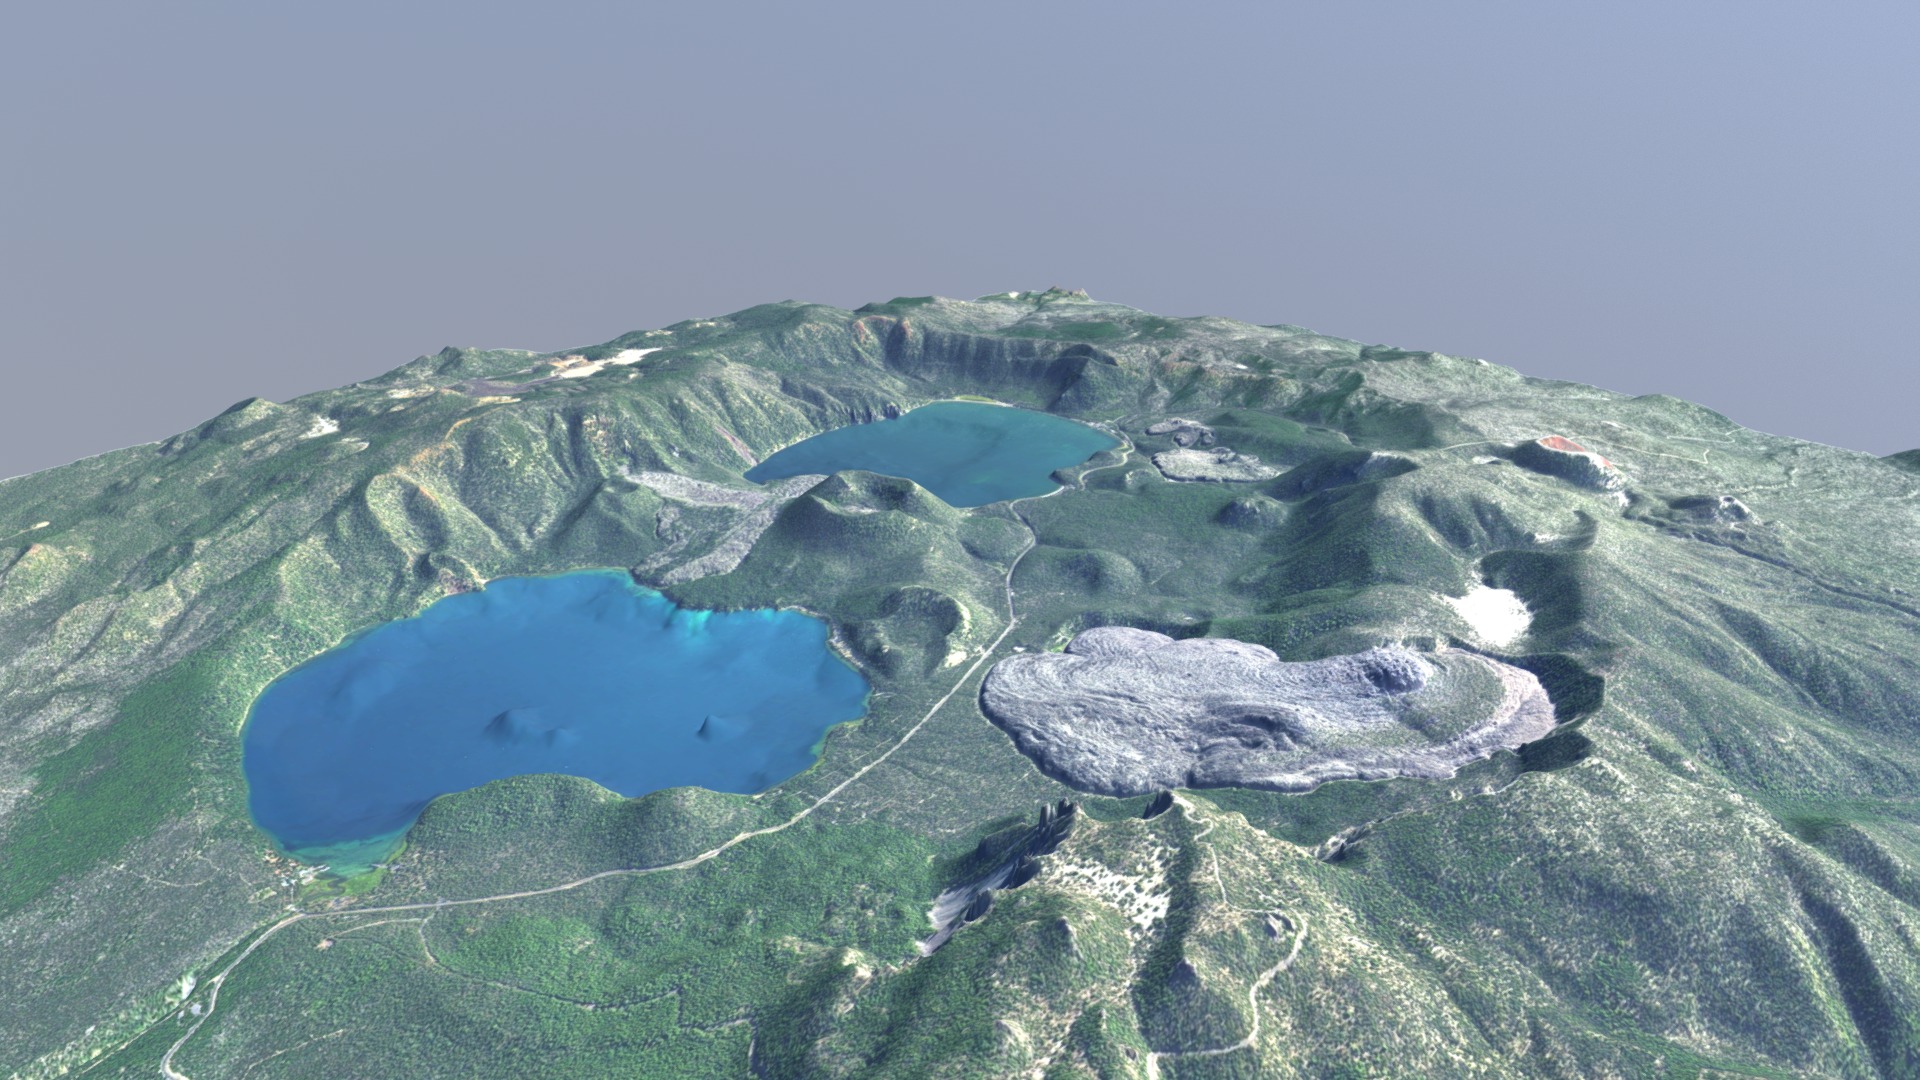 3D model Newberry Volcano, Oregon – LiDAR Surface Model - This is a 3D model of the Newberry Volcano, Oregon - LiDAR Surface Model. The 3D model is about an aerial view of a large body of water.